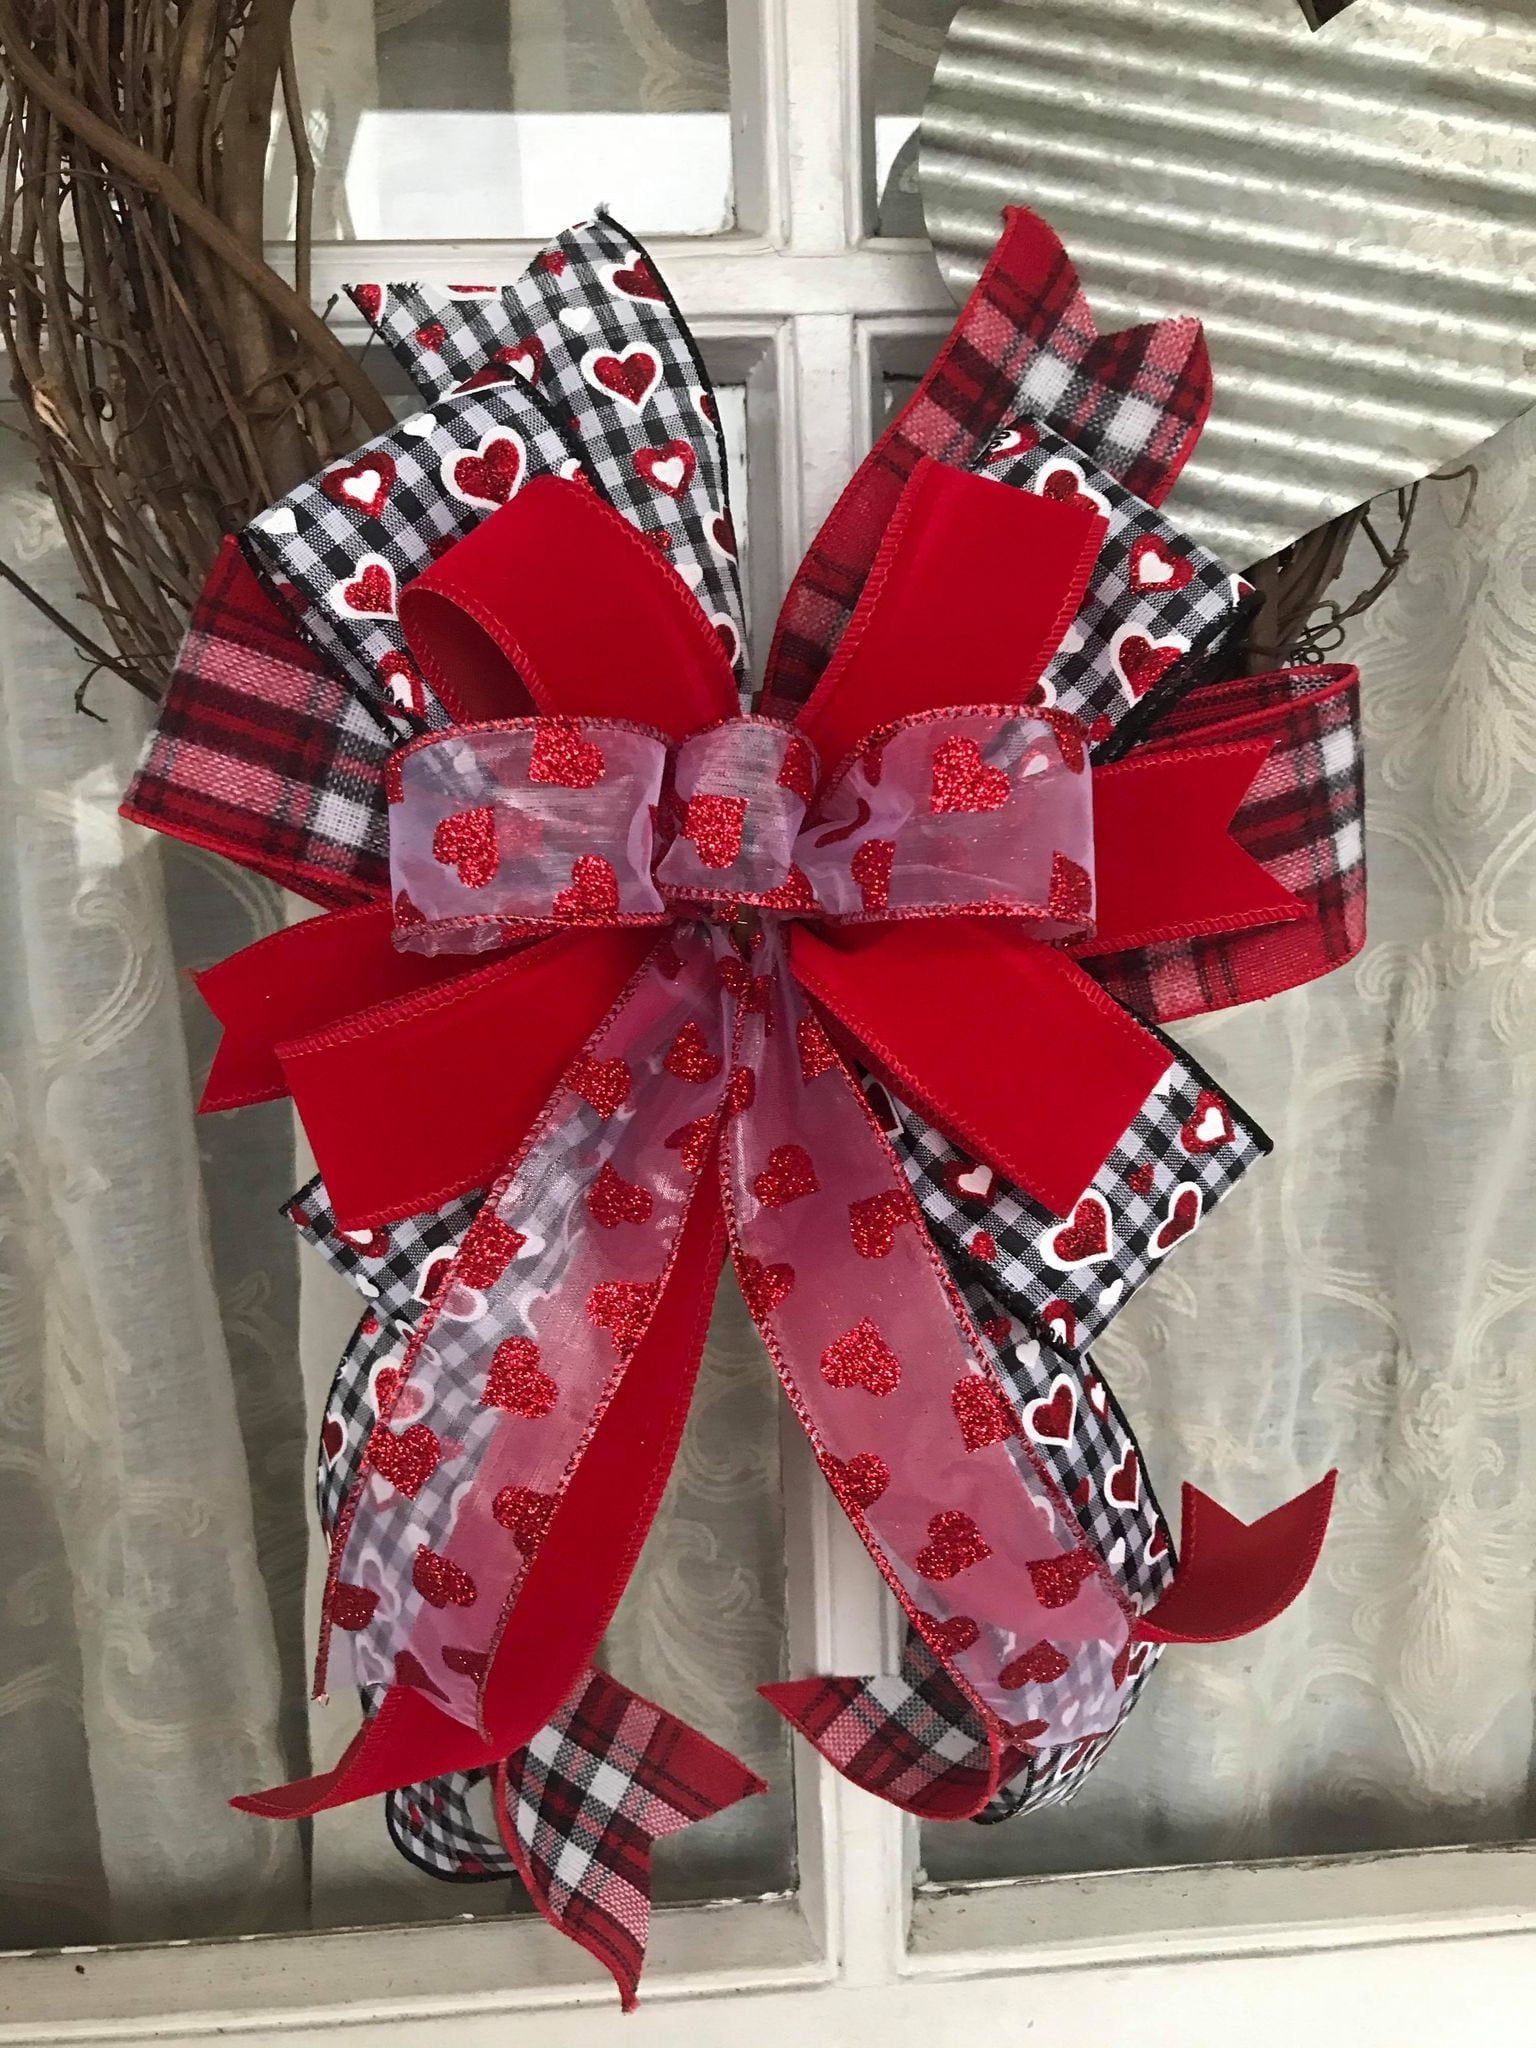 Farmhouse Valentines Wreaths for Front Door, Valentines Day Gift, Lambs Ear  Wreath, Red and White Buffalo Plaid Check Wreath 